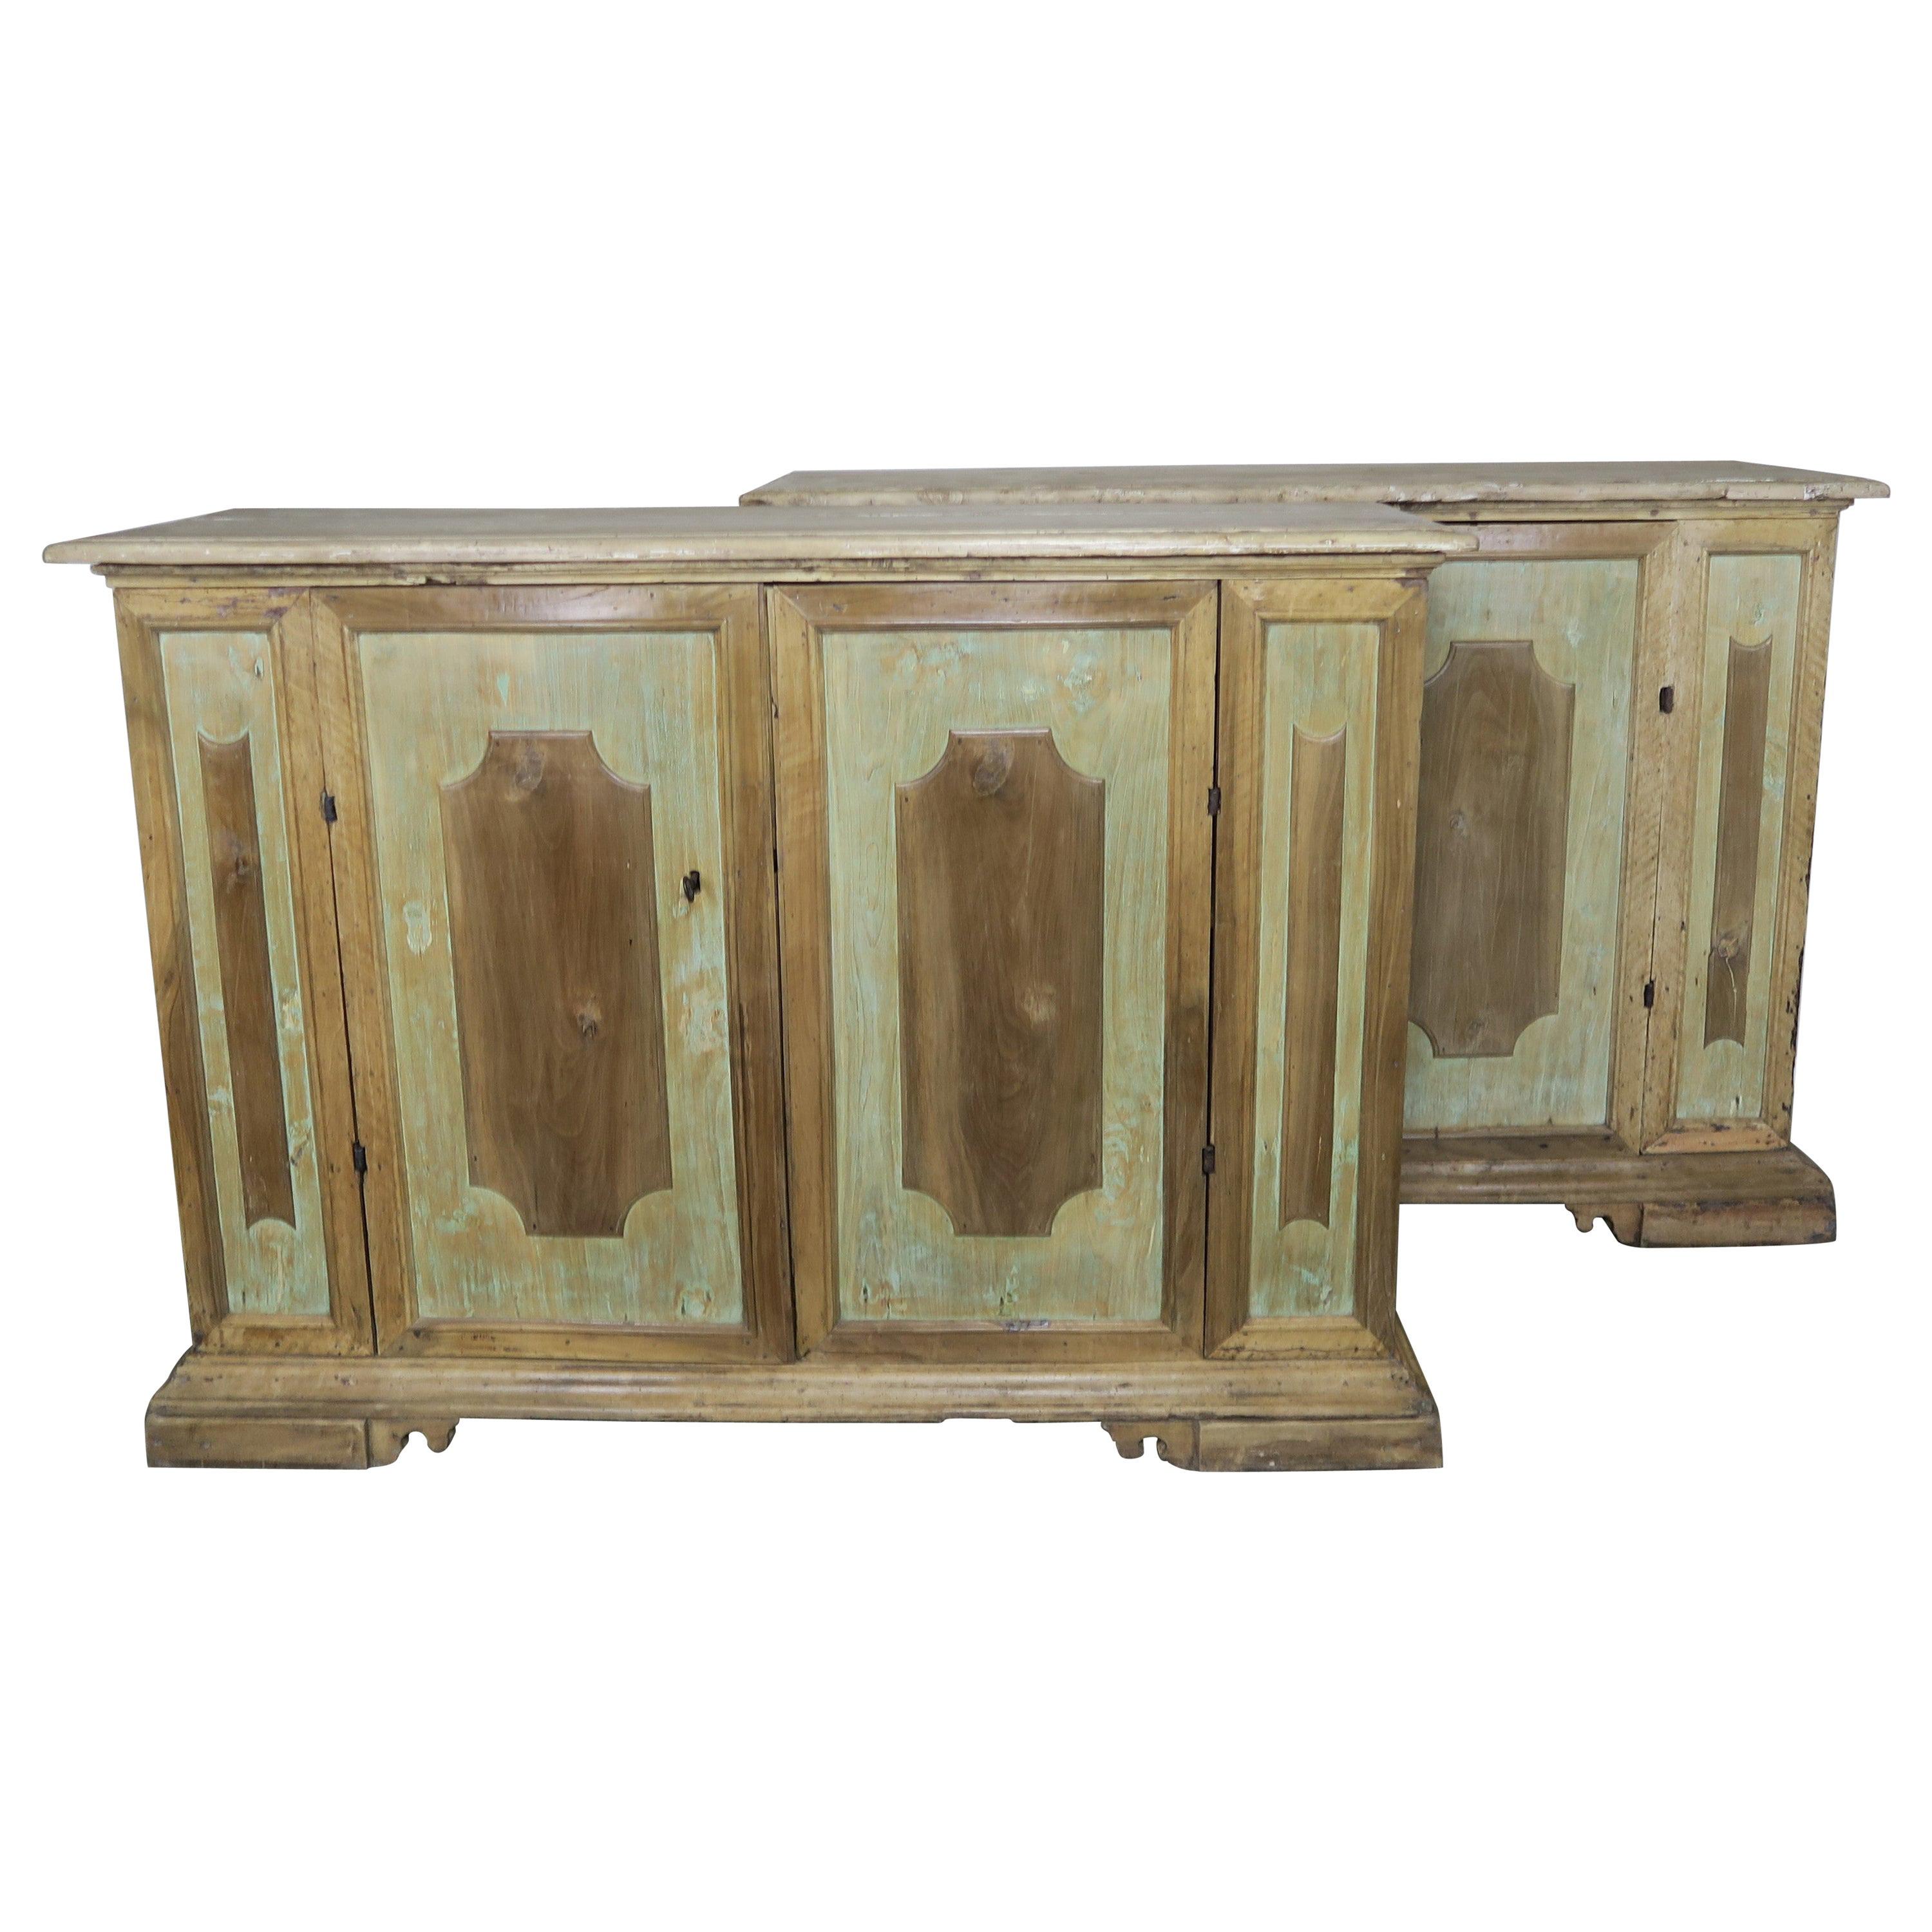 Pair of Early 19th Century Italian Painted Sideboards